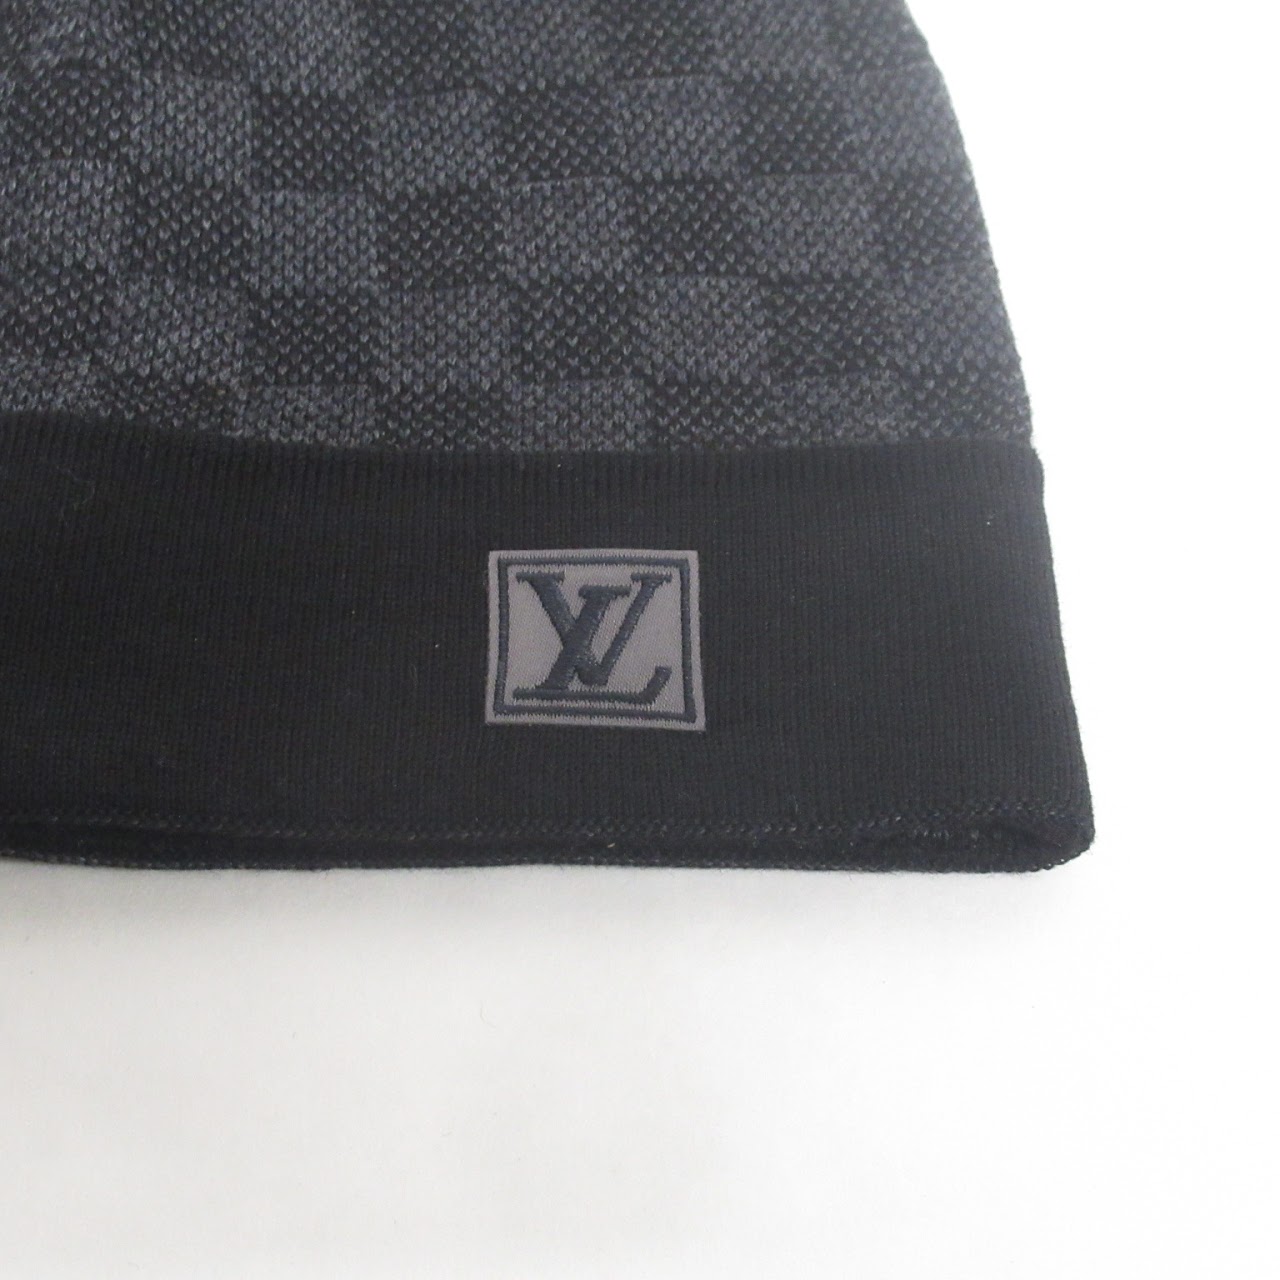 Want to buy this LV petit damier hat but i'm not sure if it's real or fake  so i wanted a second opinion, the seller has a receipt but it still feels